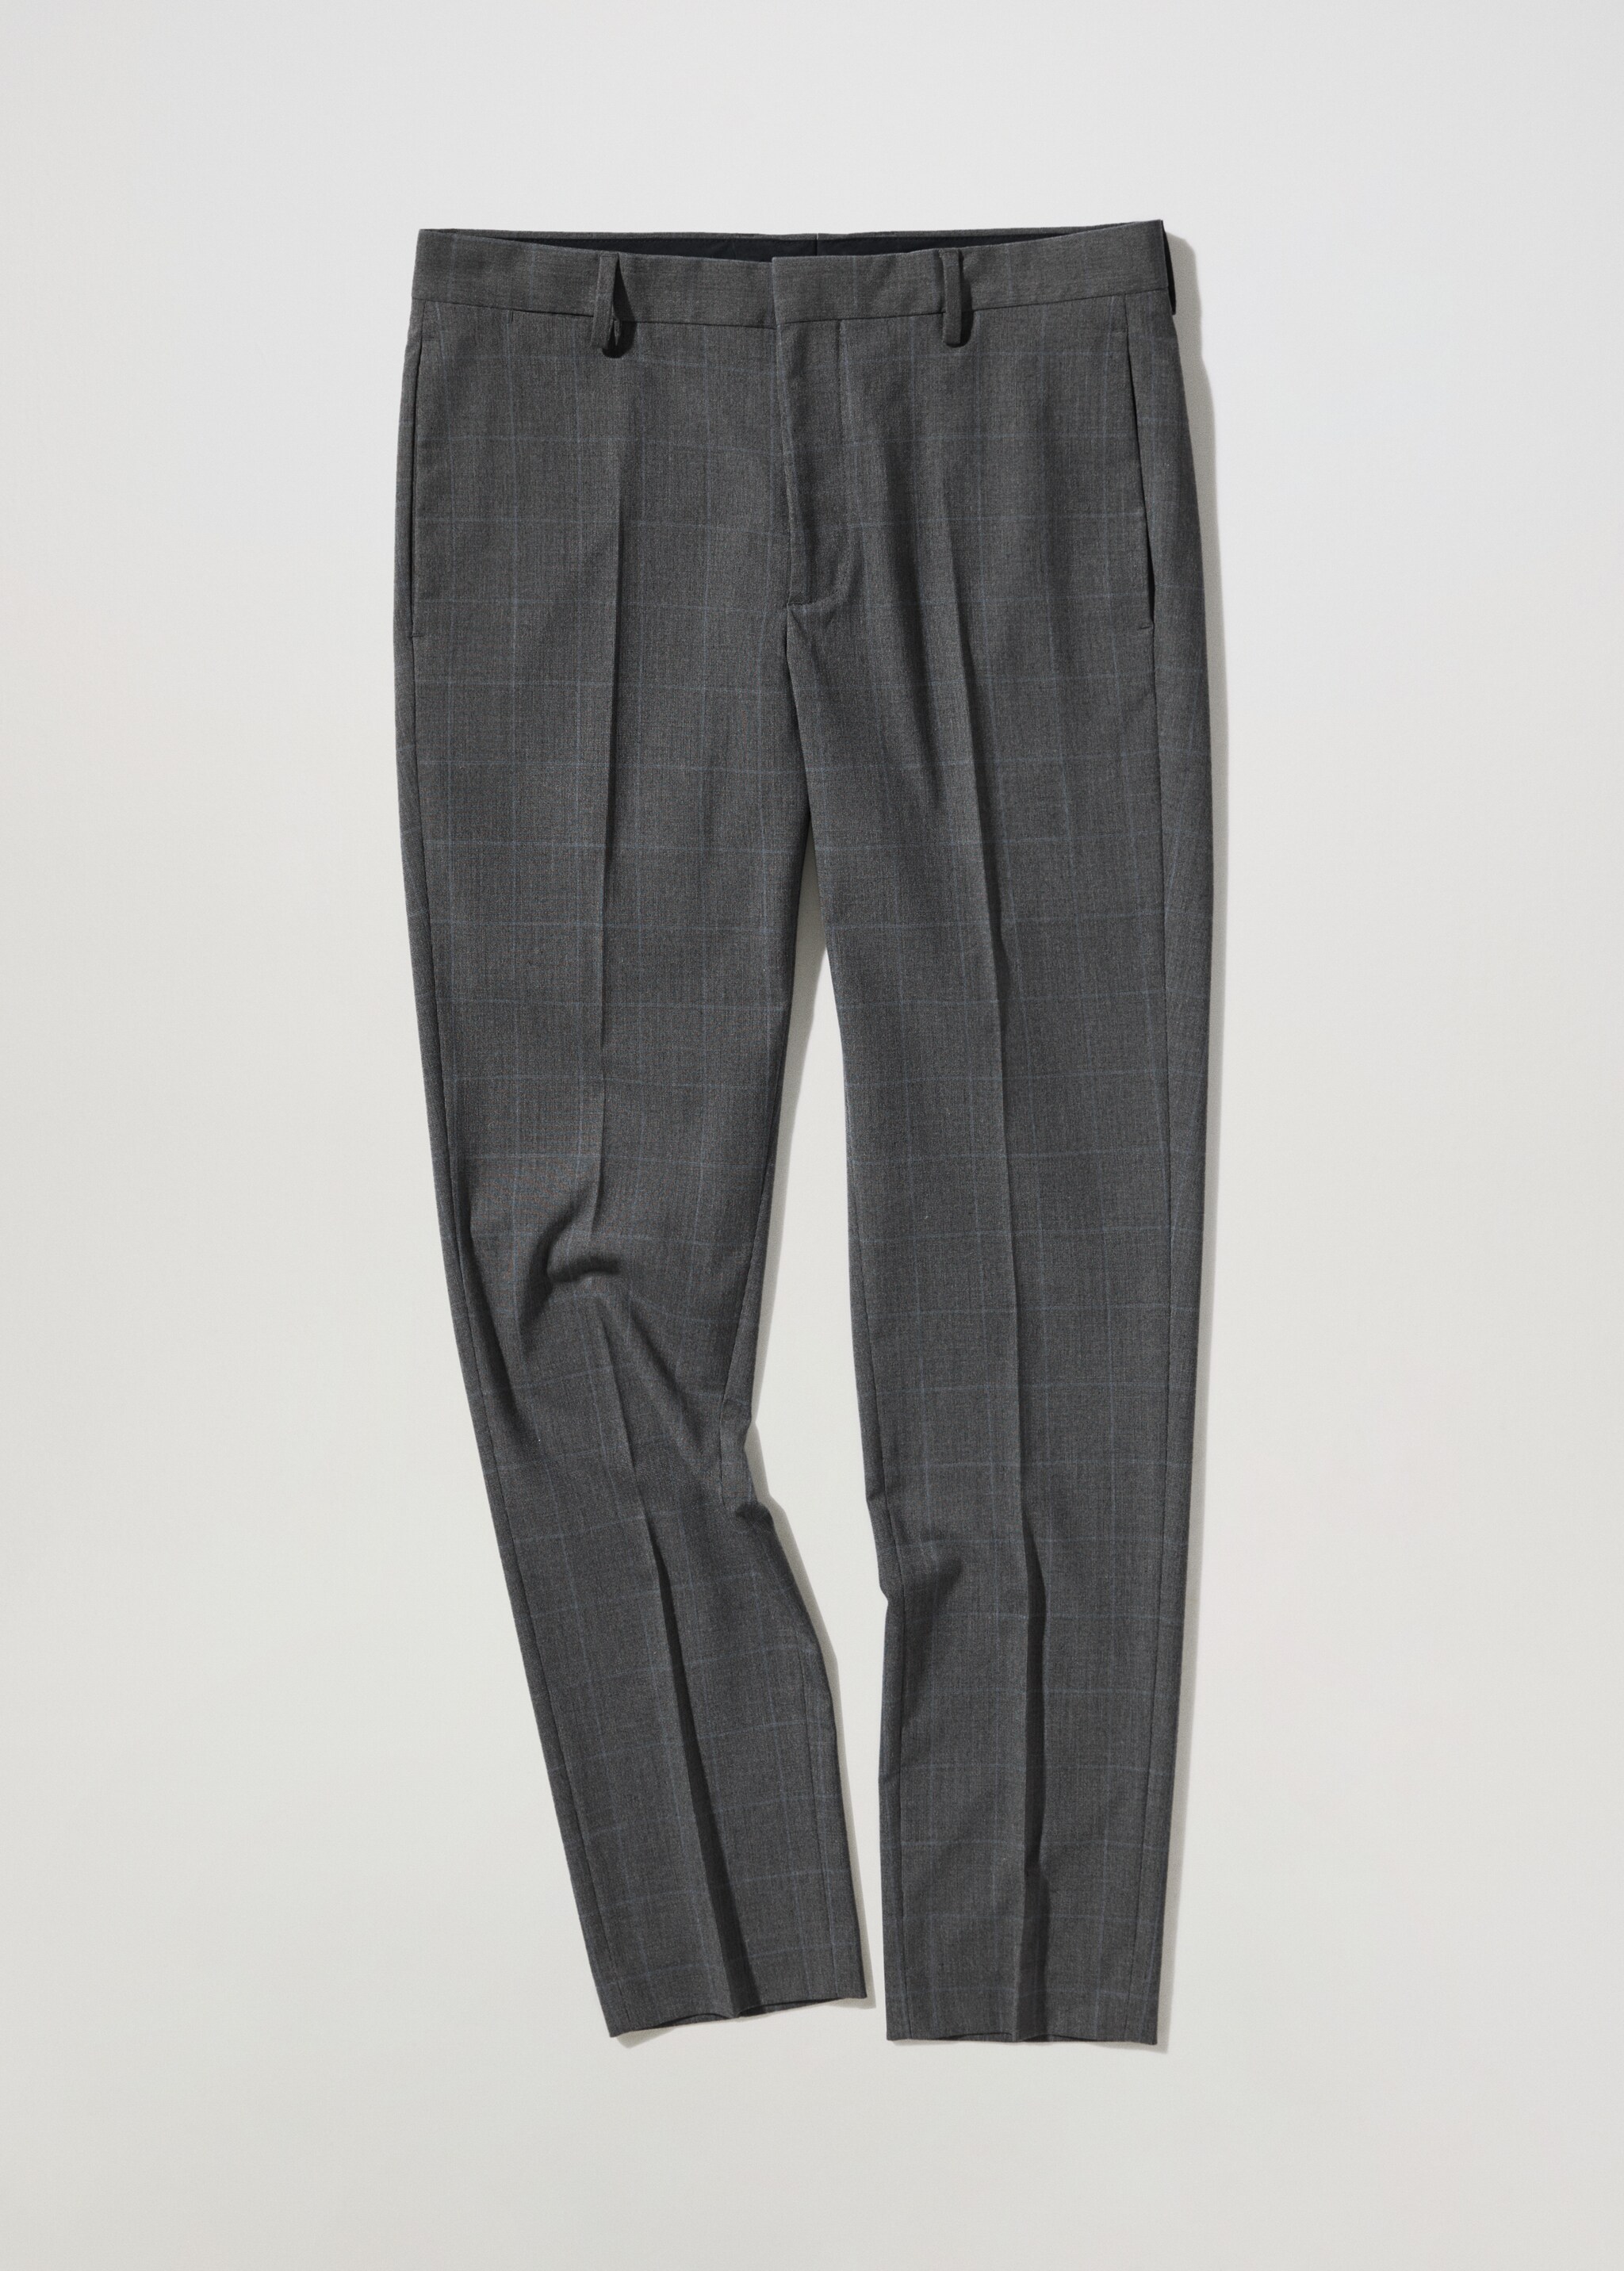 Super slim fit suit trousers - Article without model